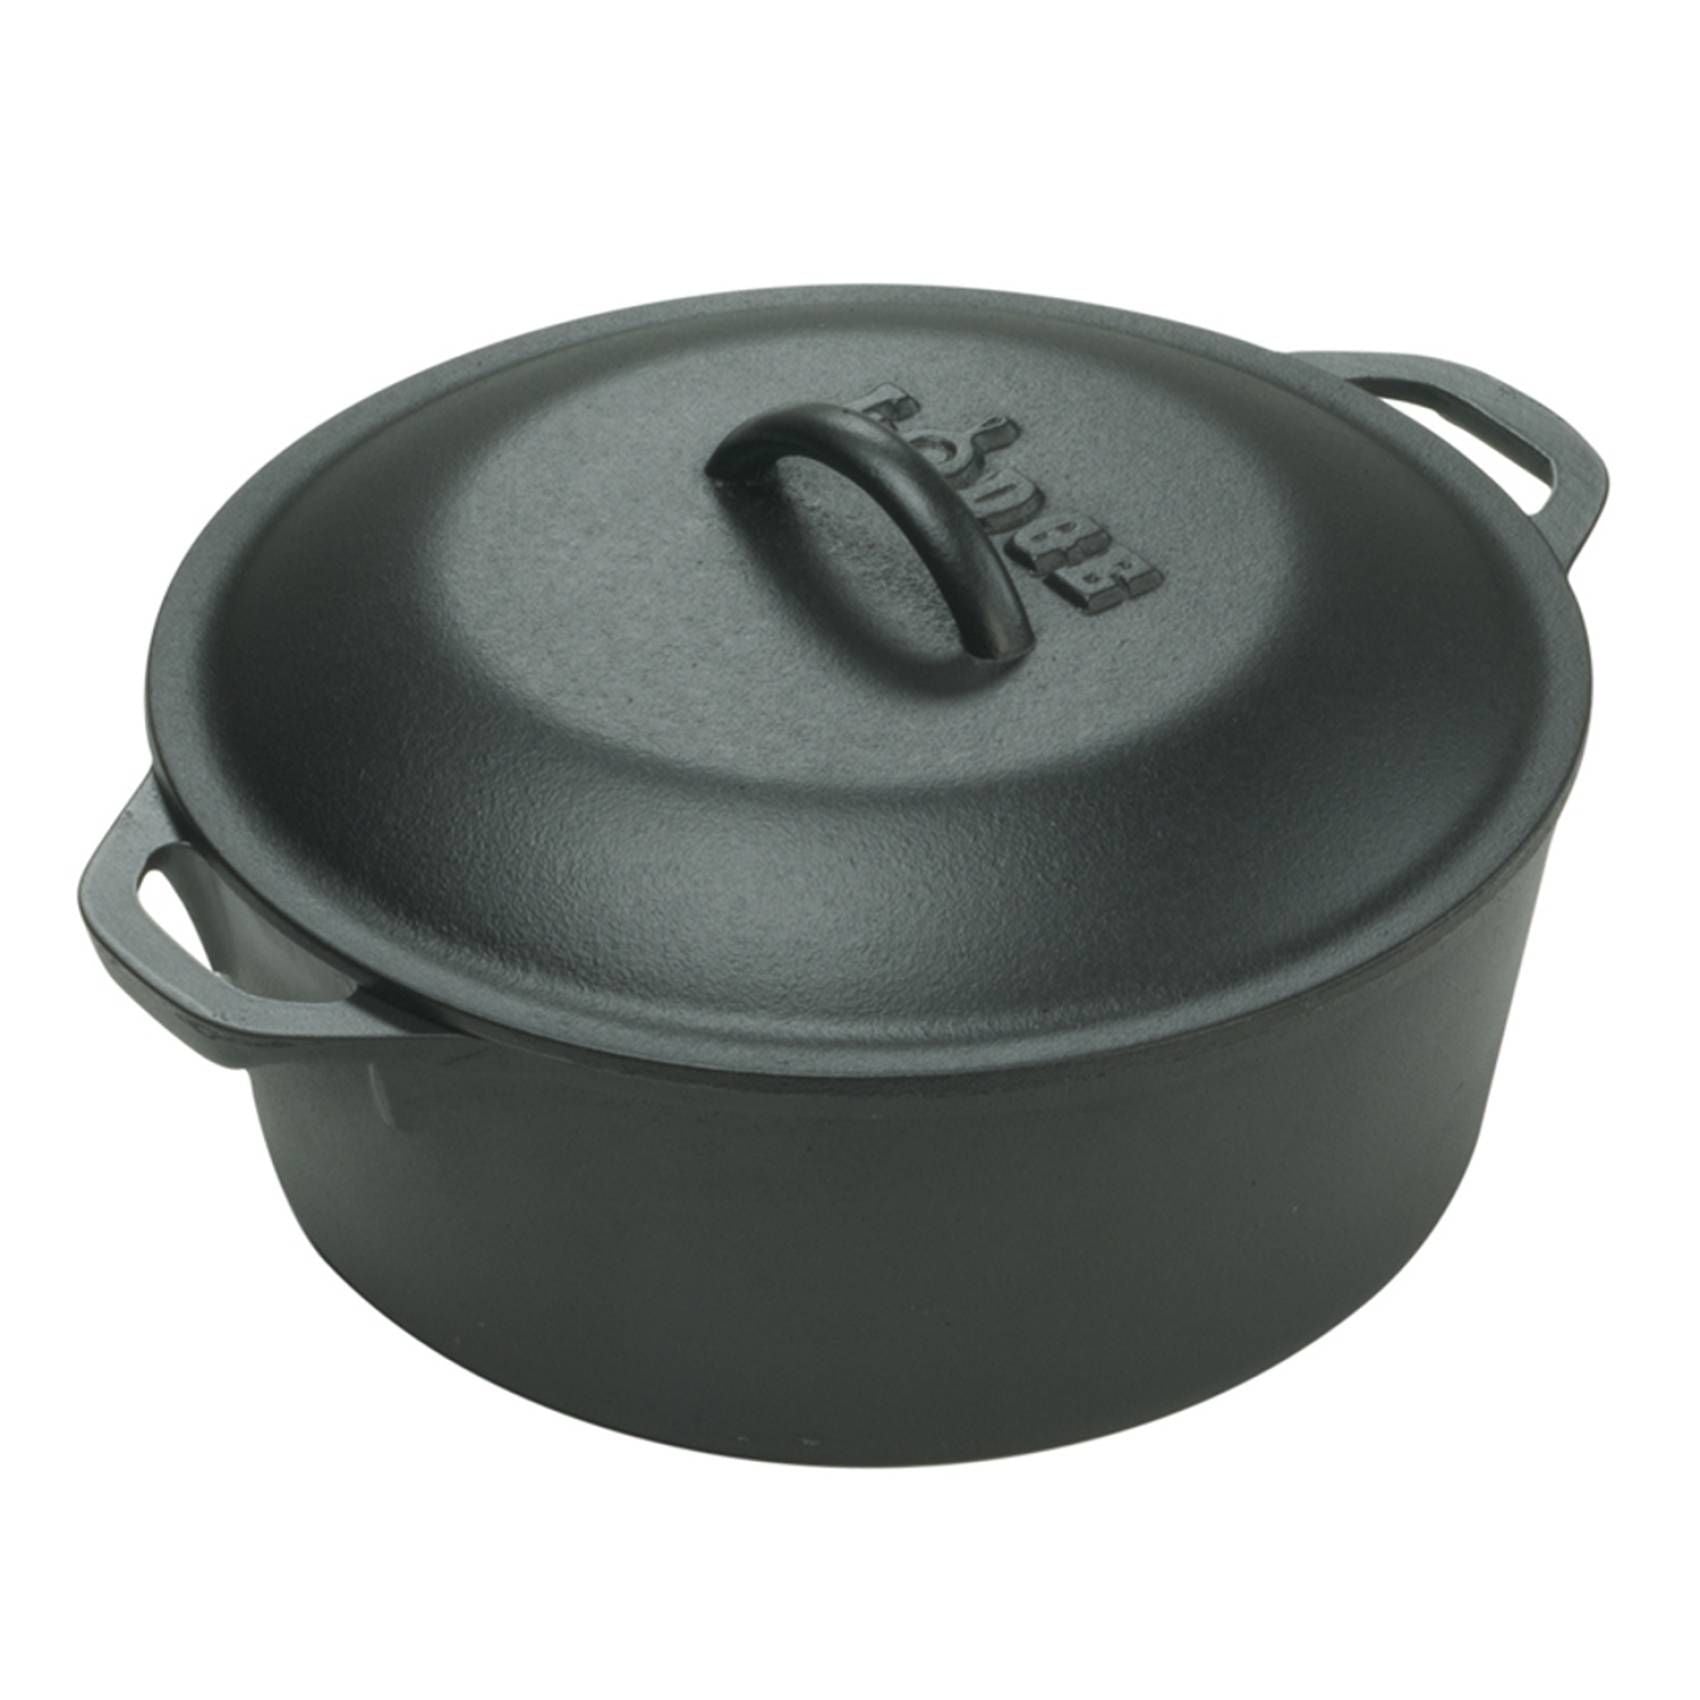 Lodge Cast Iron Dutch Oven with Lid & Loop Handle - 6.6 Litre